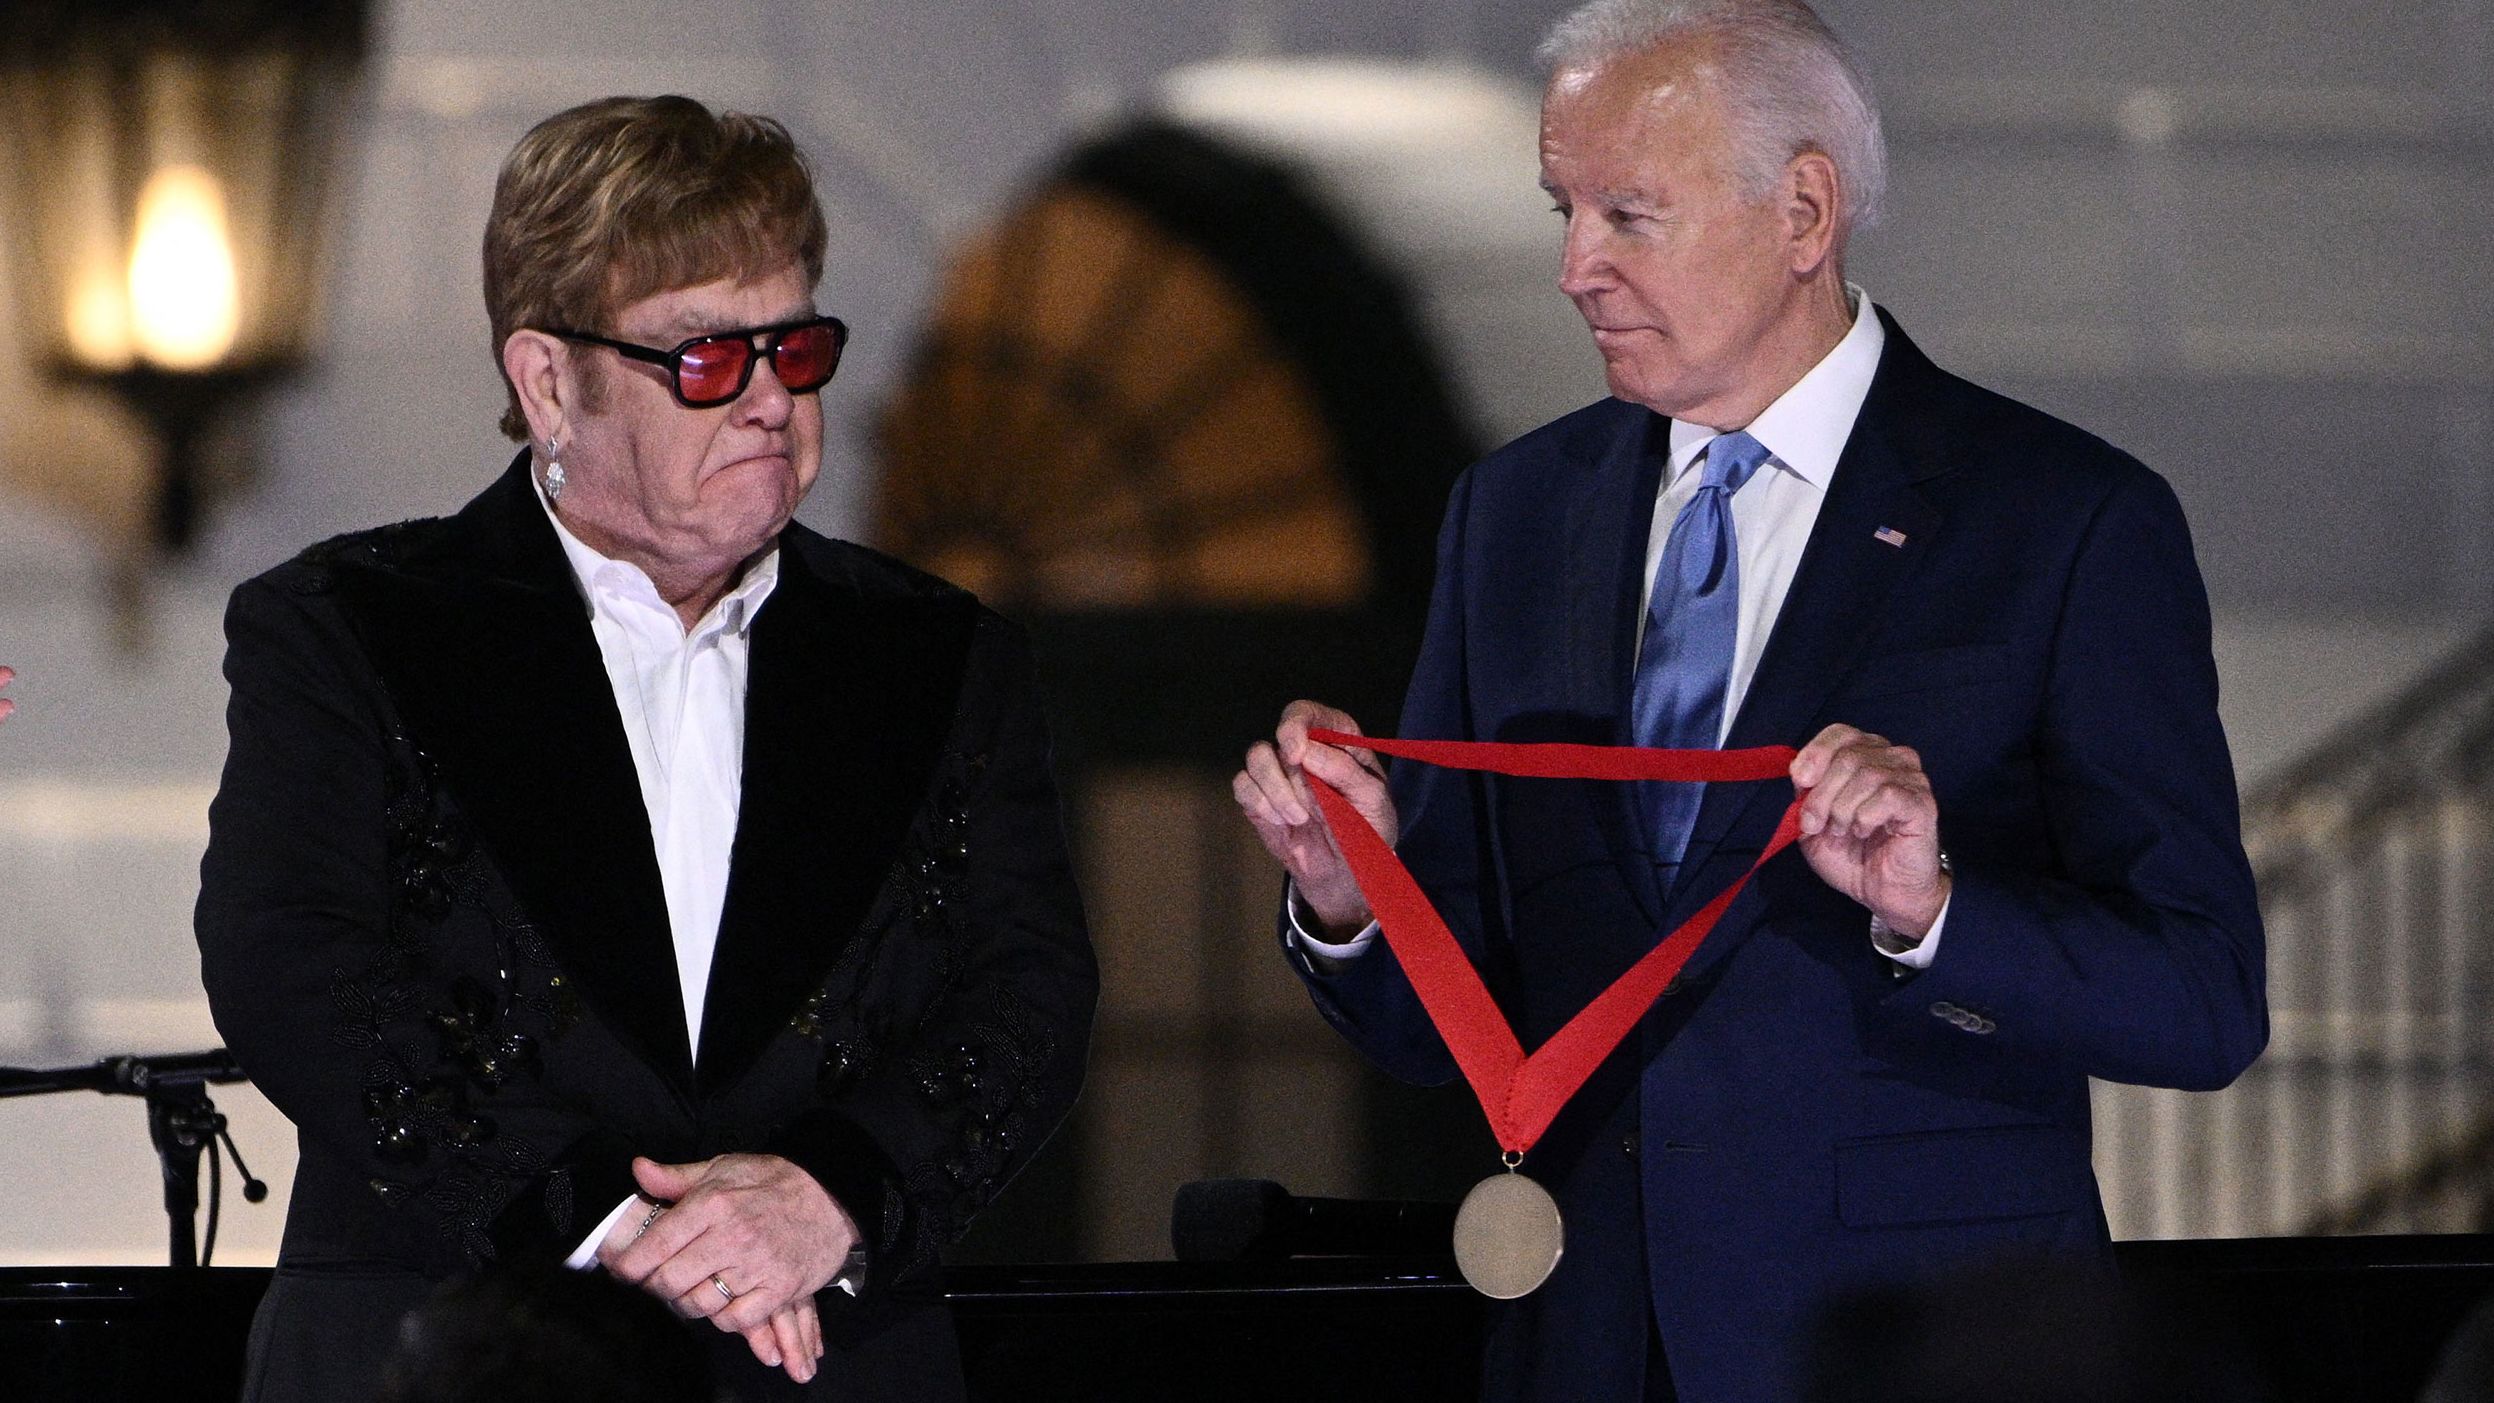 Singer Elton John becomes emotional as US President Joe Biden <a href="https://www.cnn.com/2022/09/23/politics/elton-john-humanities-medal-white-house-performance-biden/index.html" target="_blank">presents him with the National Humanities Medal</a> at the end of a concert held on the South Lawn of the White House on Friday, September 23. John performed a number of hit songs during "A Night When Hope and History Rhyme," a concert in collaboration with A&E Networks and The History Channel.